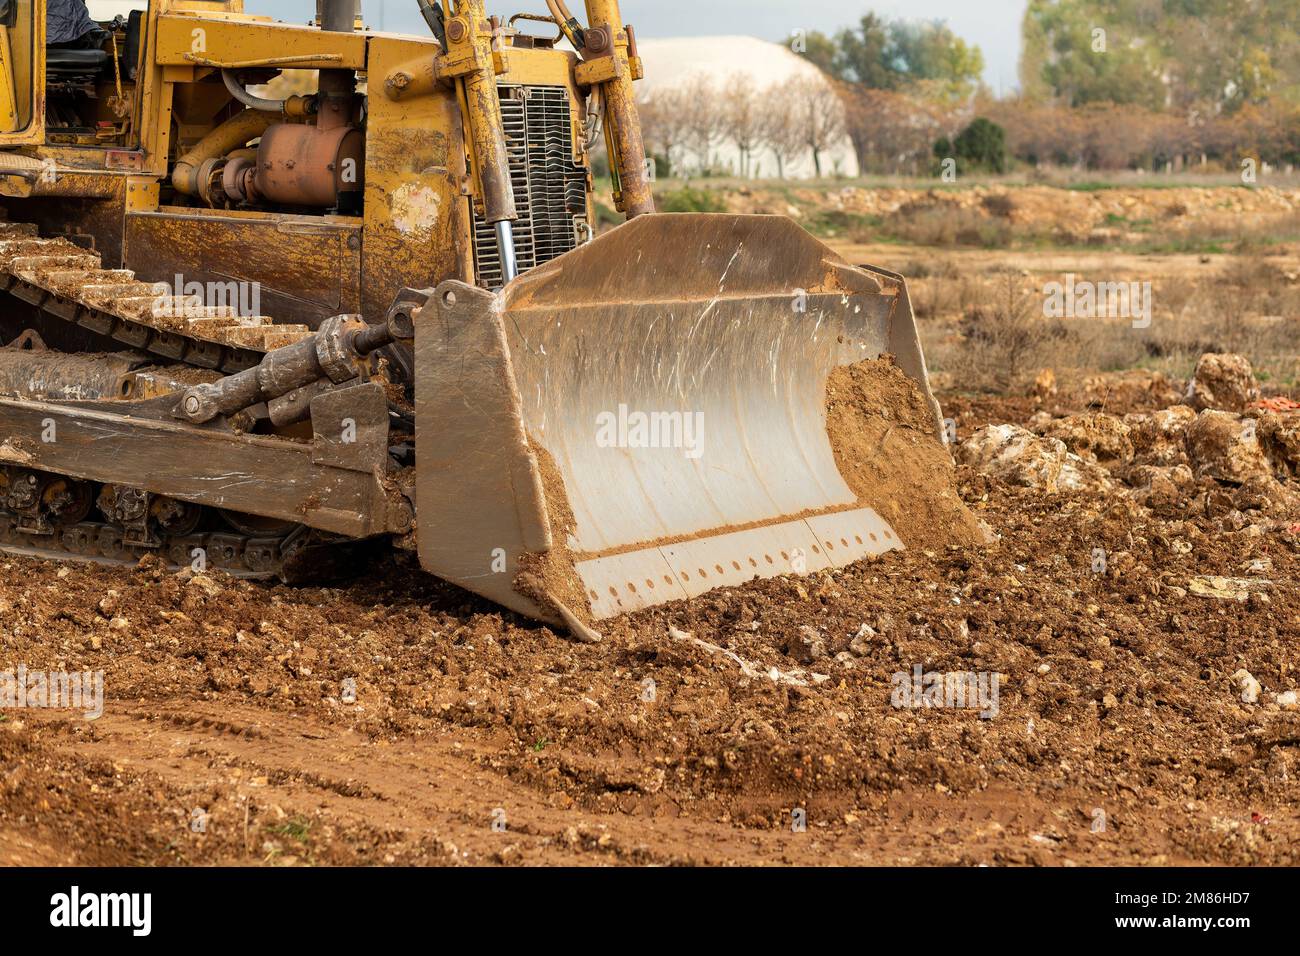 Dozer working at construction site. Bulldozer for land clearing, grading, utility trenching and foundation digging. Crawler tractor and earth-moving e Stock Photo